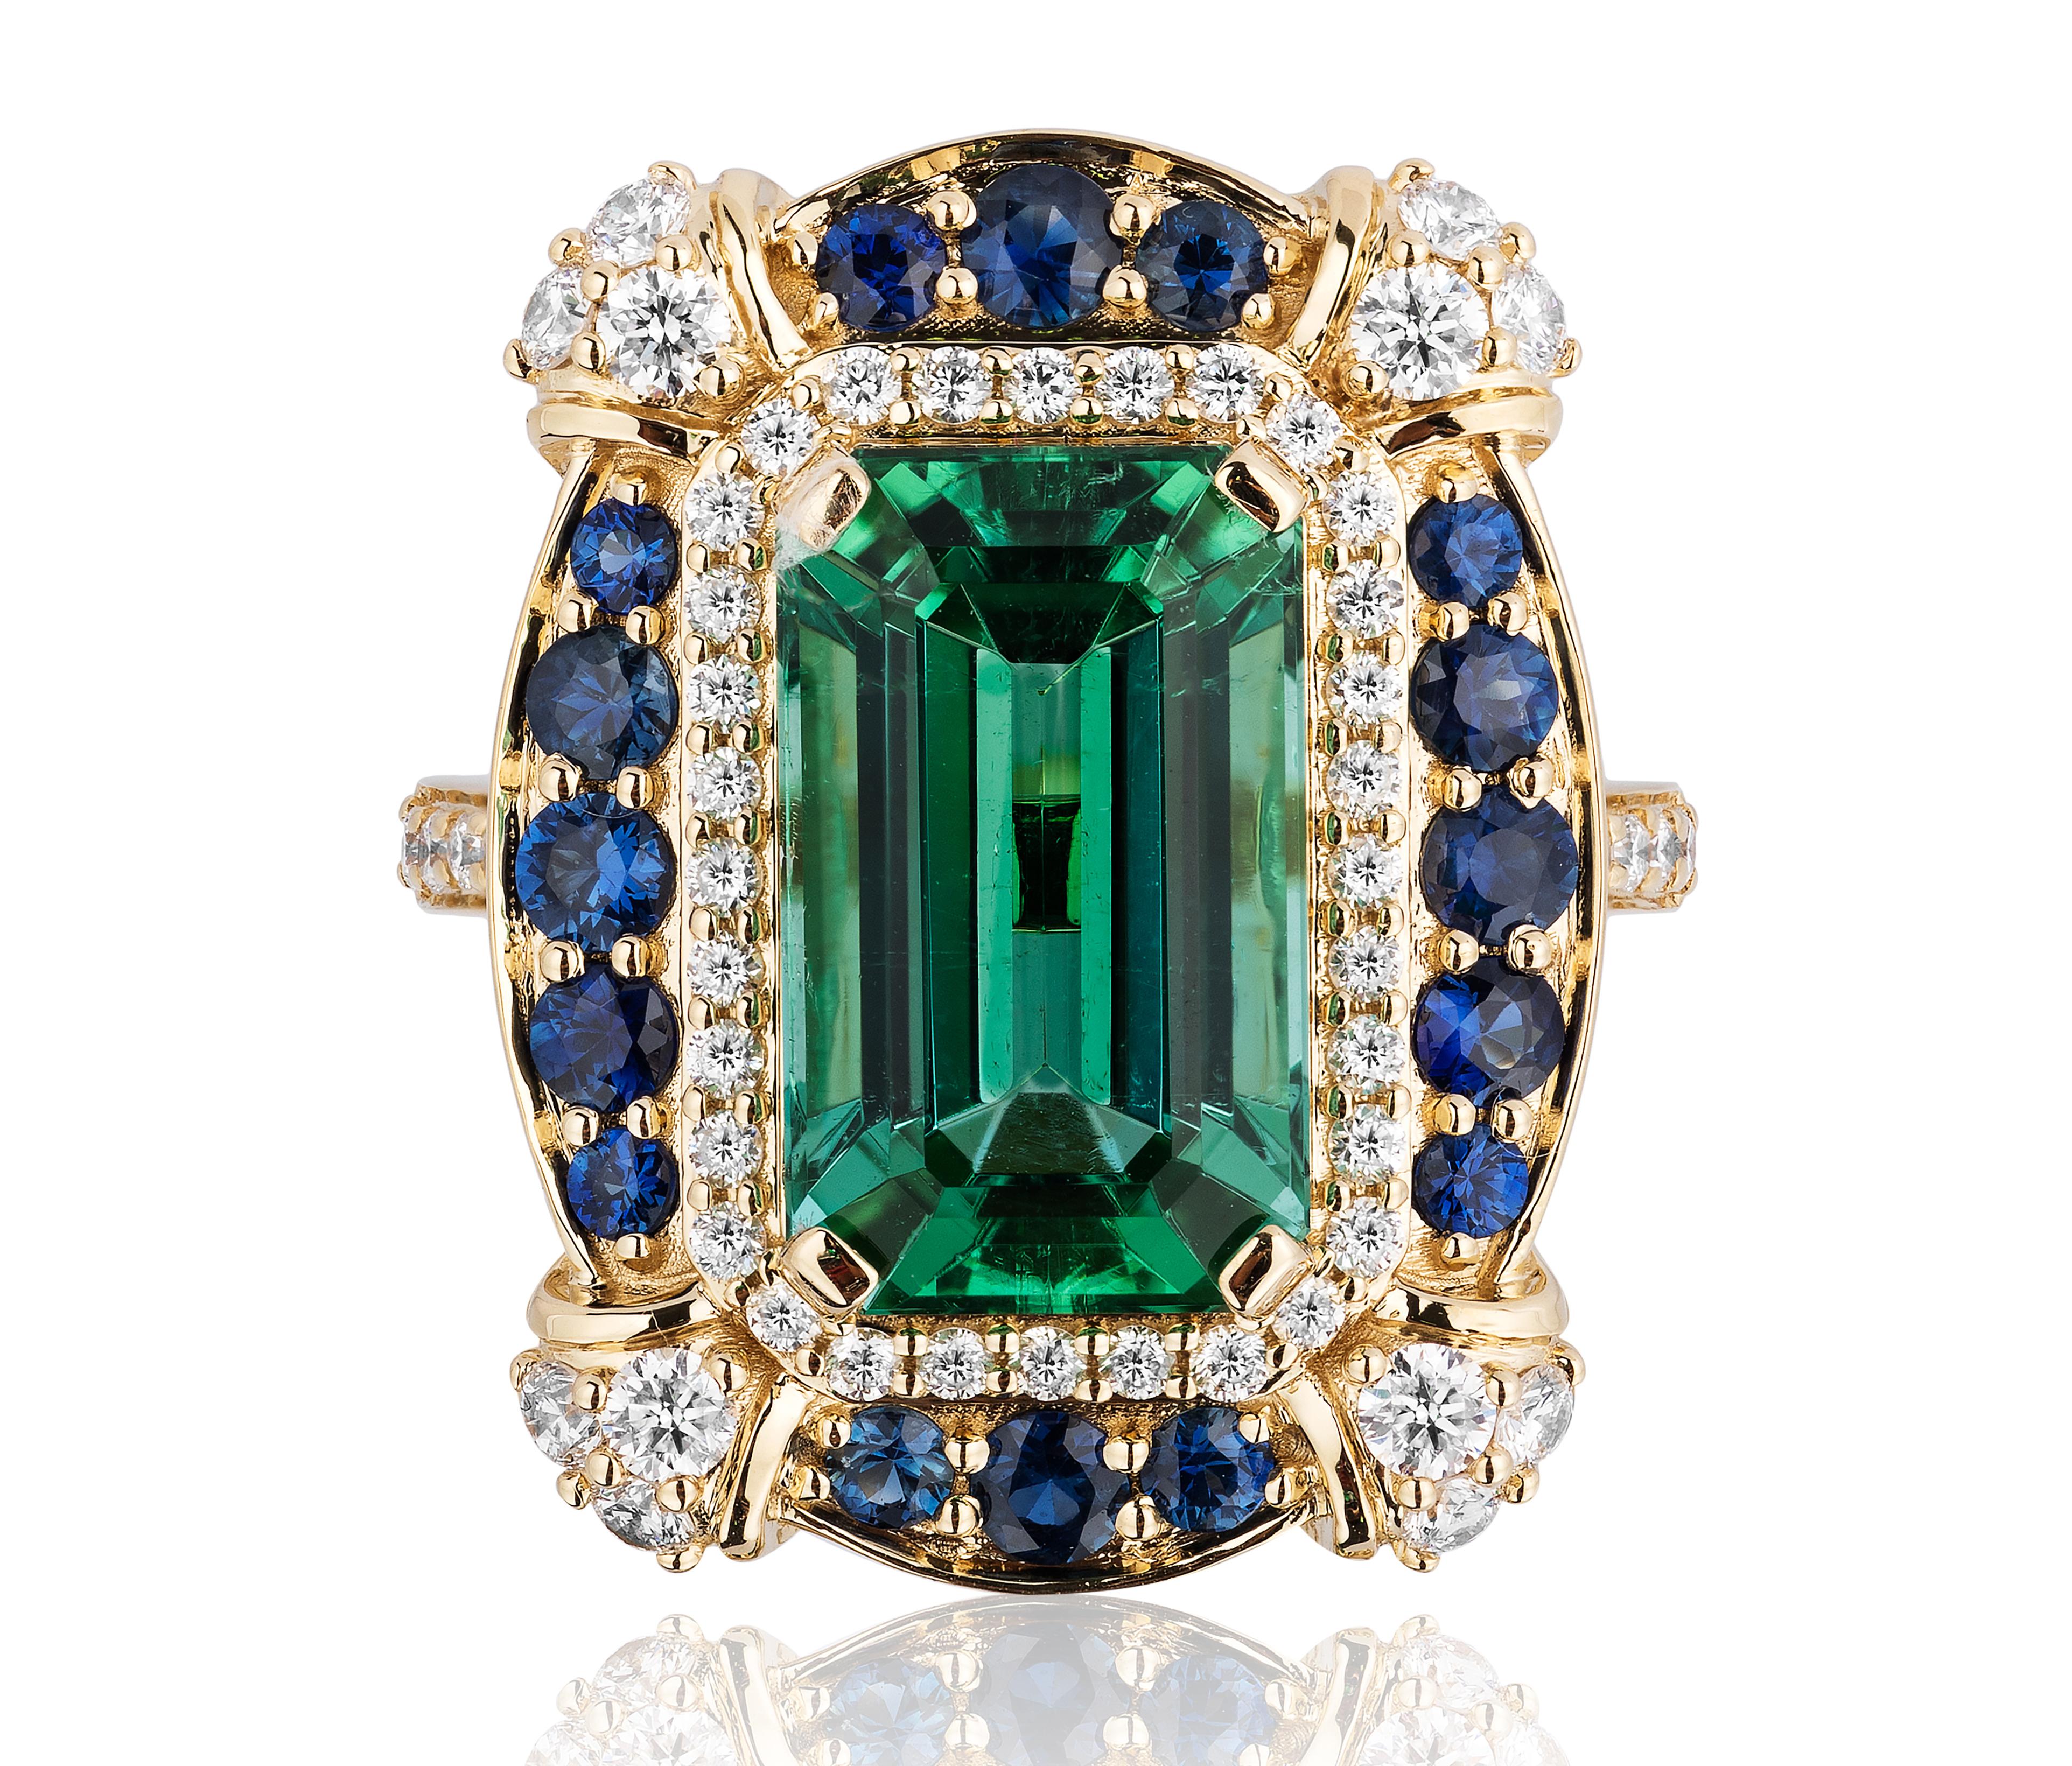 Green Tourmaline Emerald Cut Ring with Diamonds in 18K Yellow Gold, from 'G-One' Collection 

Approx. Wt: 7.09 Carats (Tourmaline), 0.94 Carats (Sapphire) 

Diamonds: G-H / VS, Approx. Wt: 0.75 Carats 